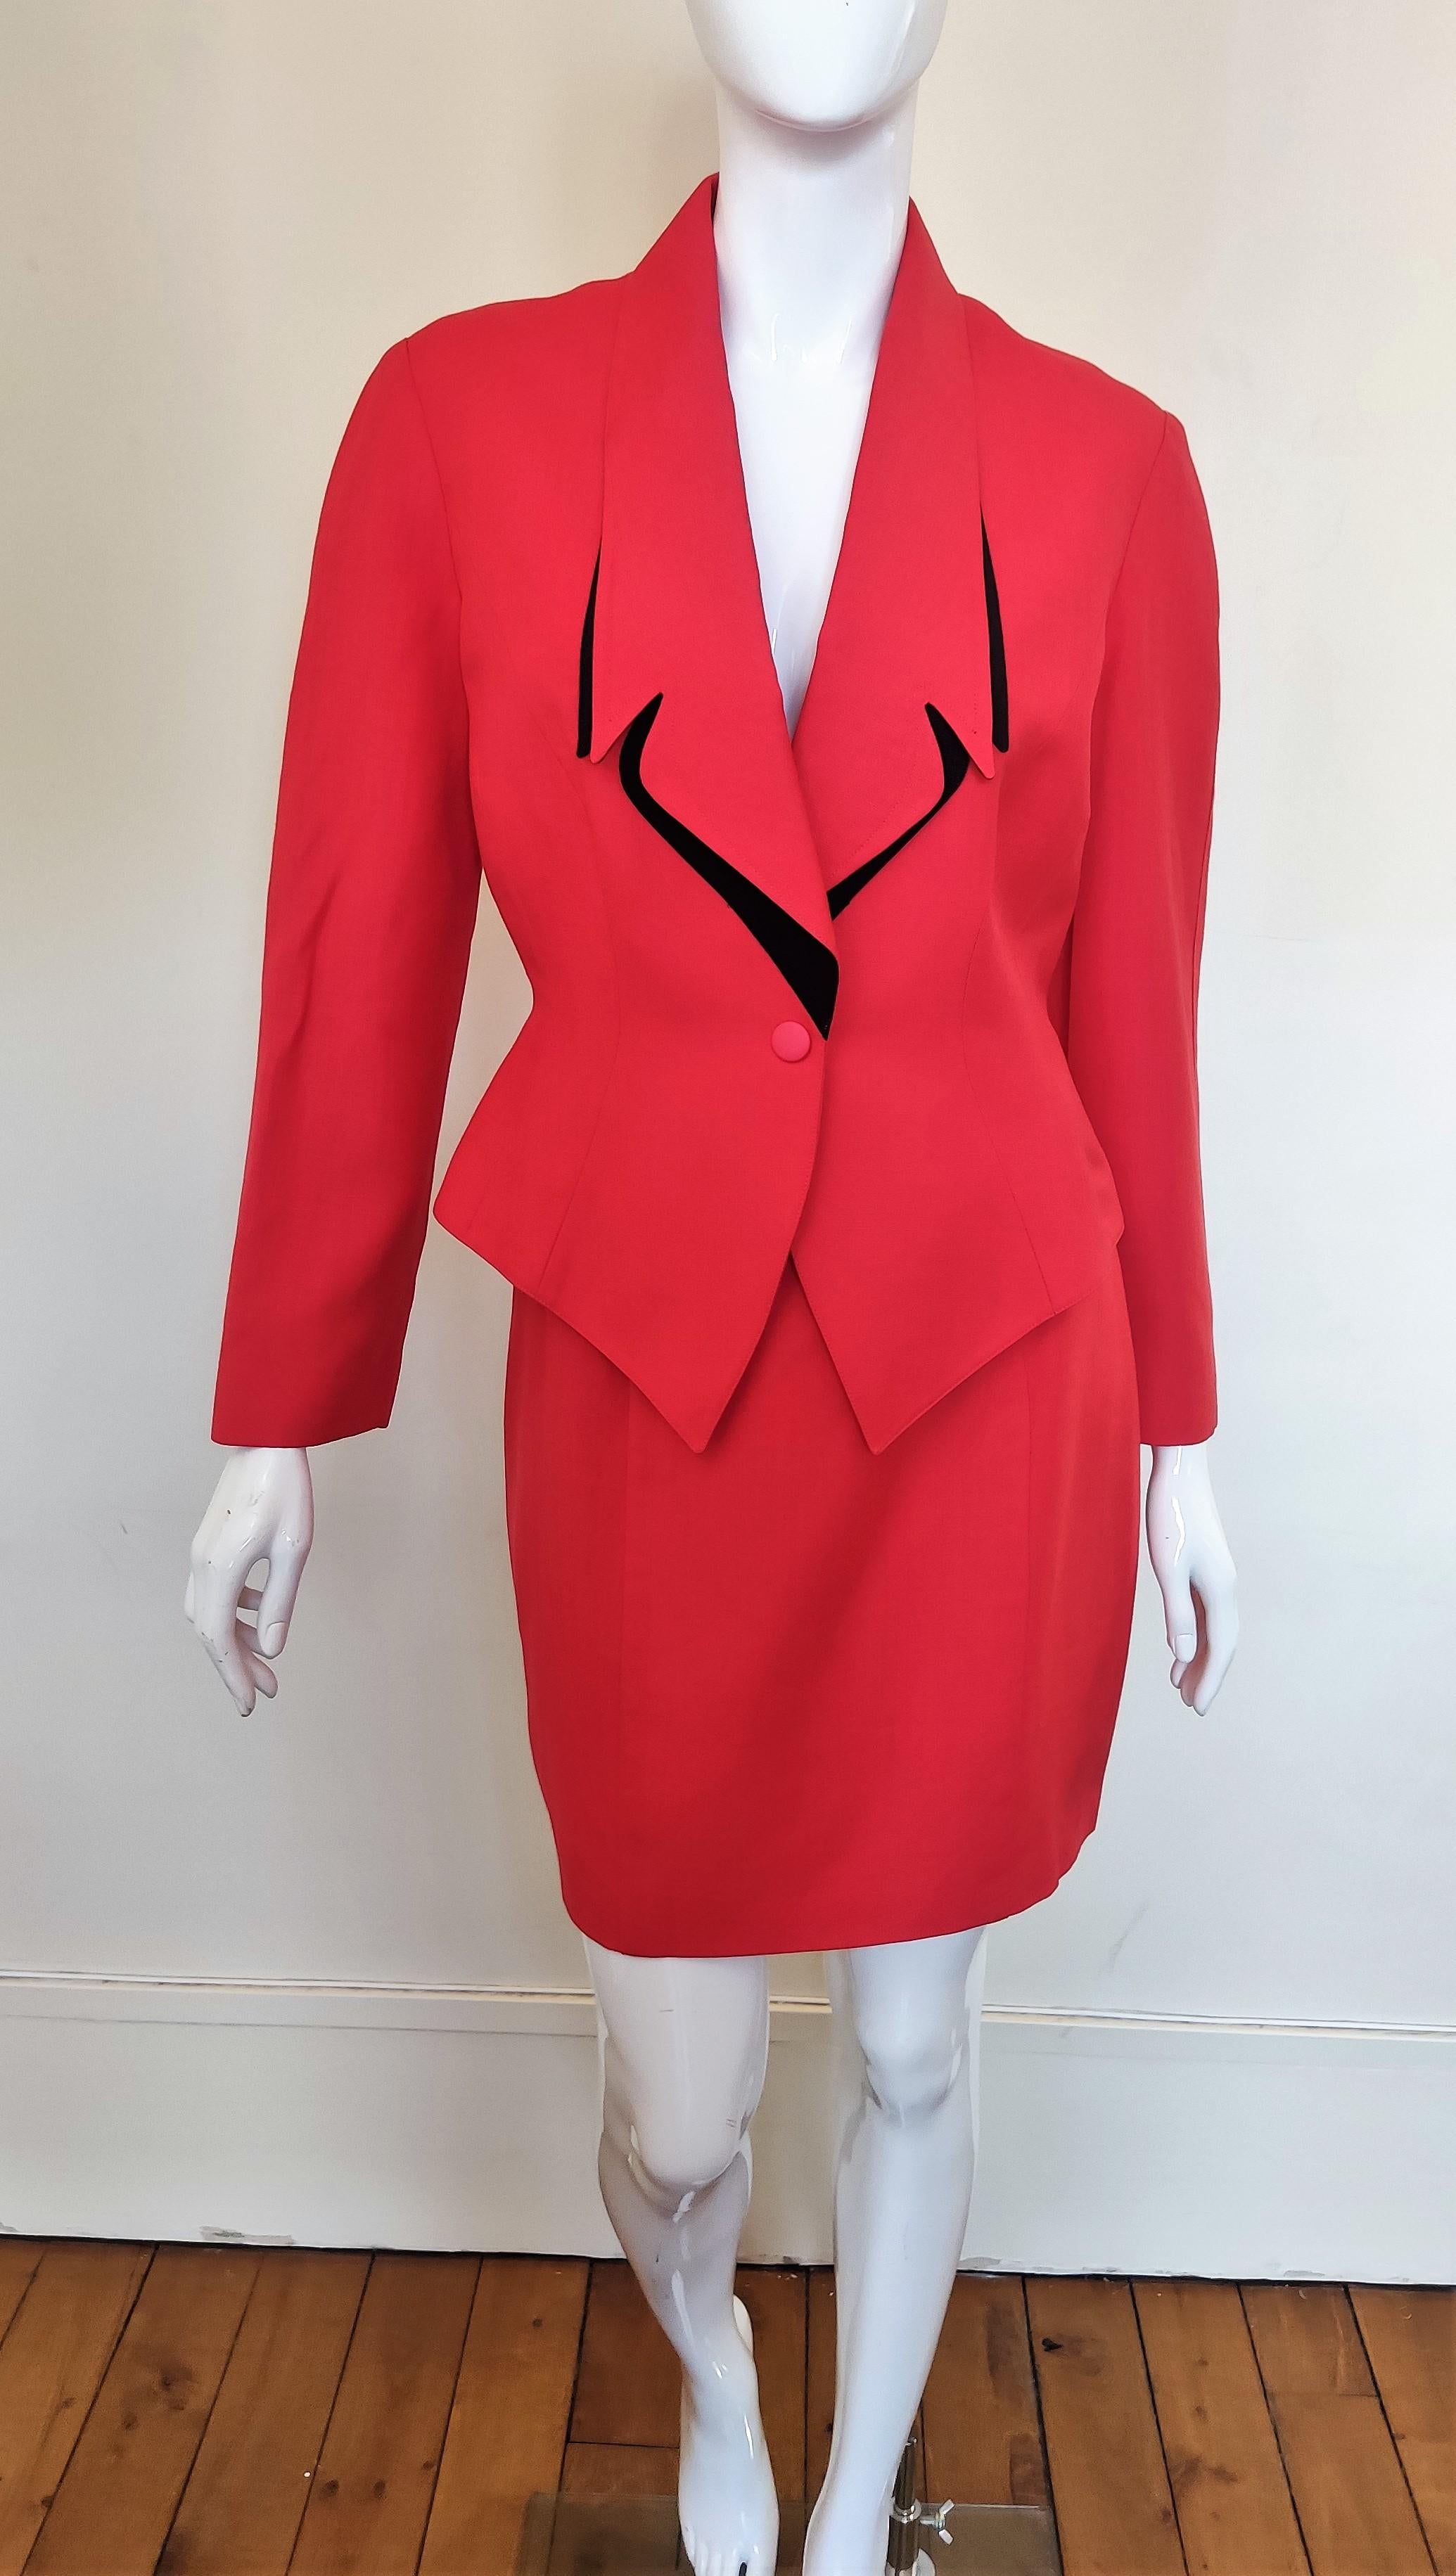 Thierry Mugler Vampire Wasp Waist Red Black Rainbow Couture Dress Ensemble Suit For Sale 8